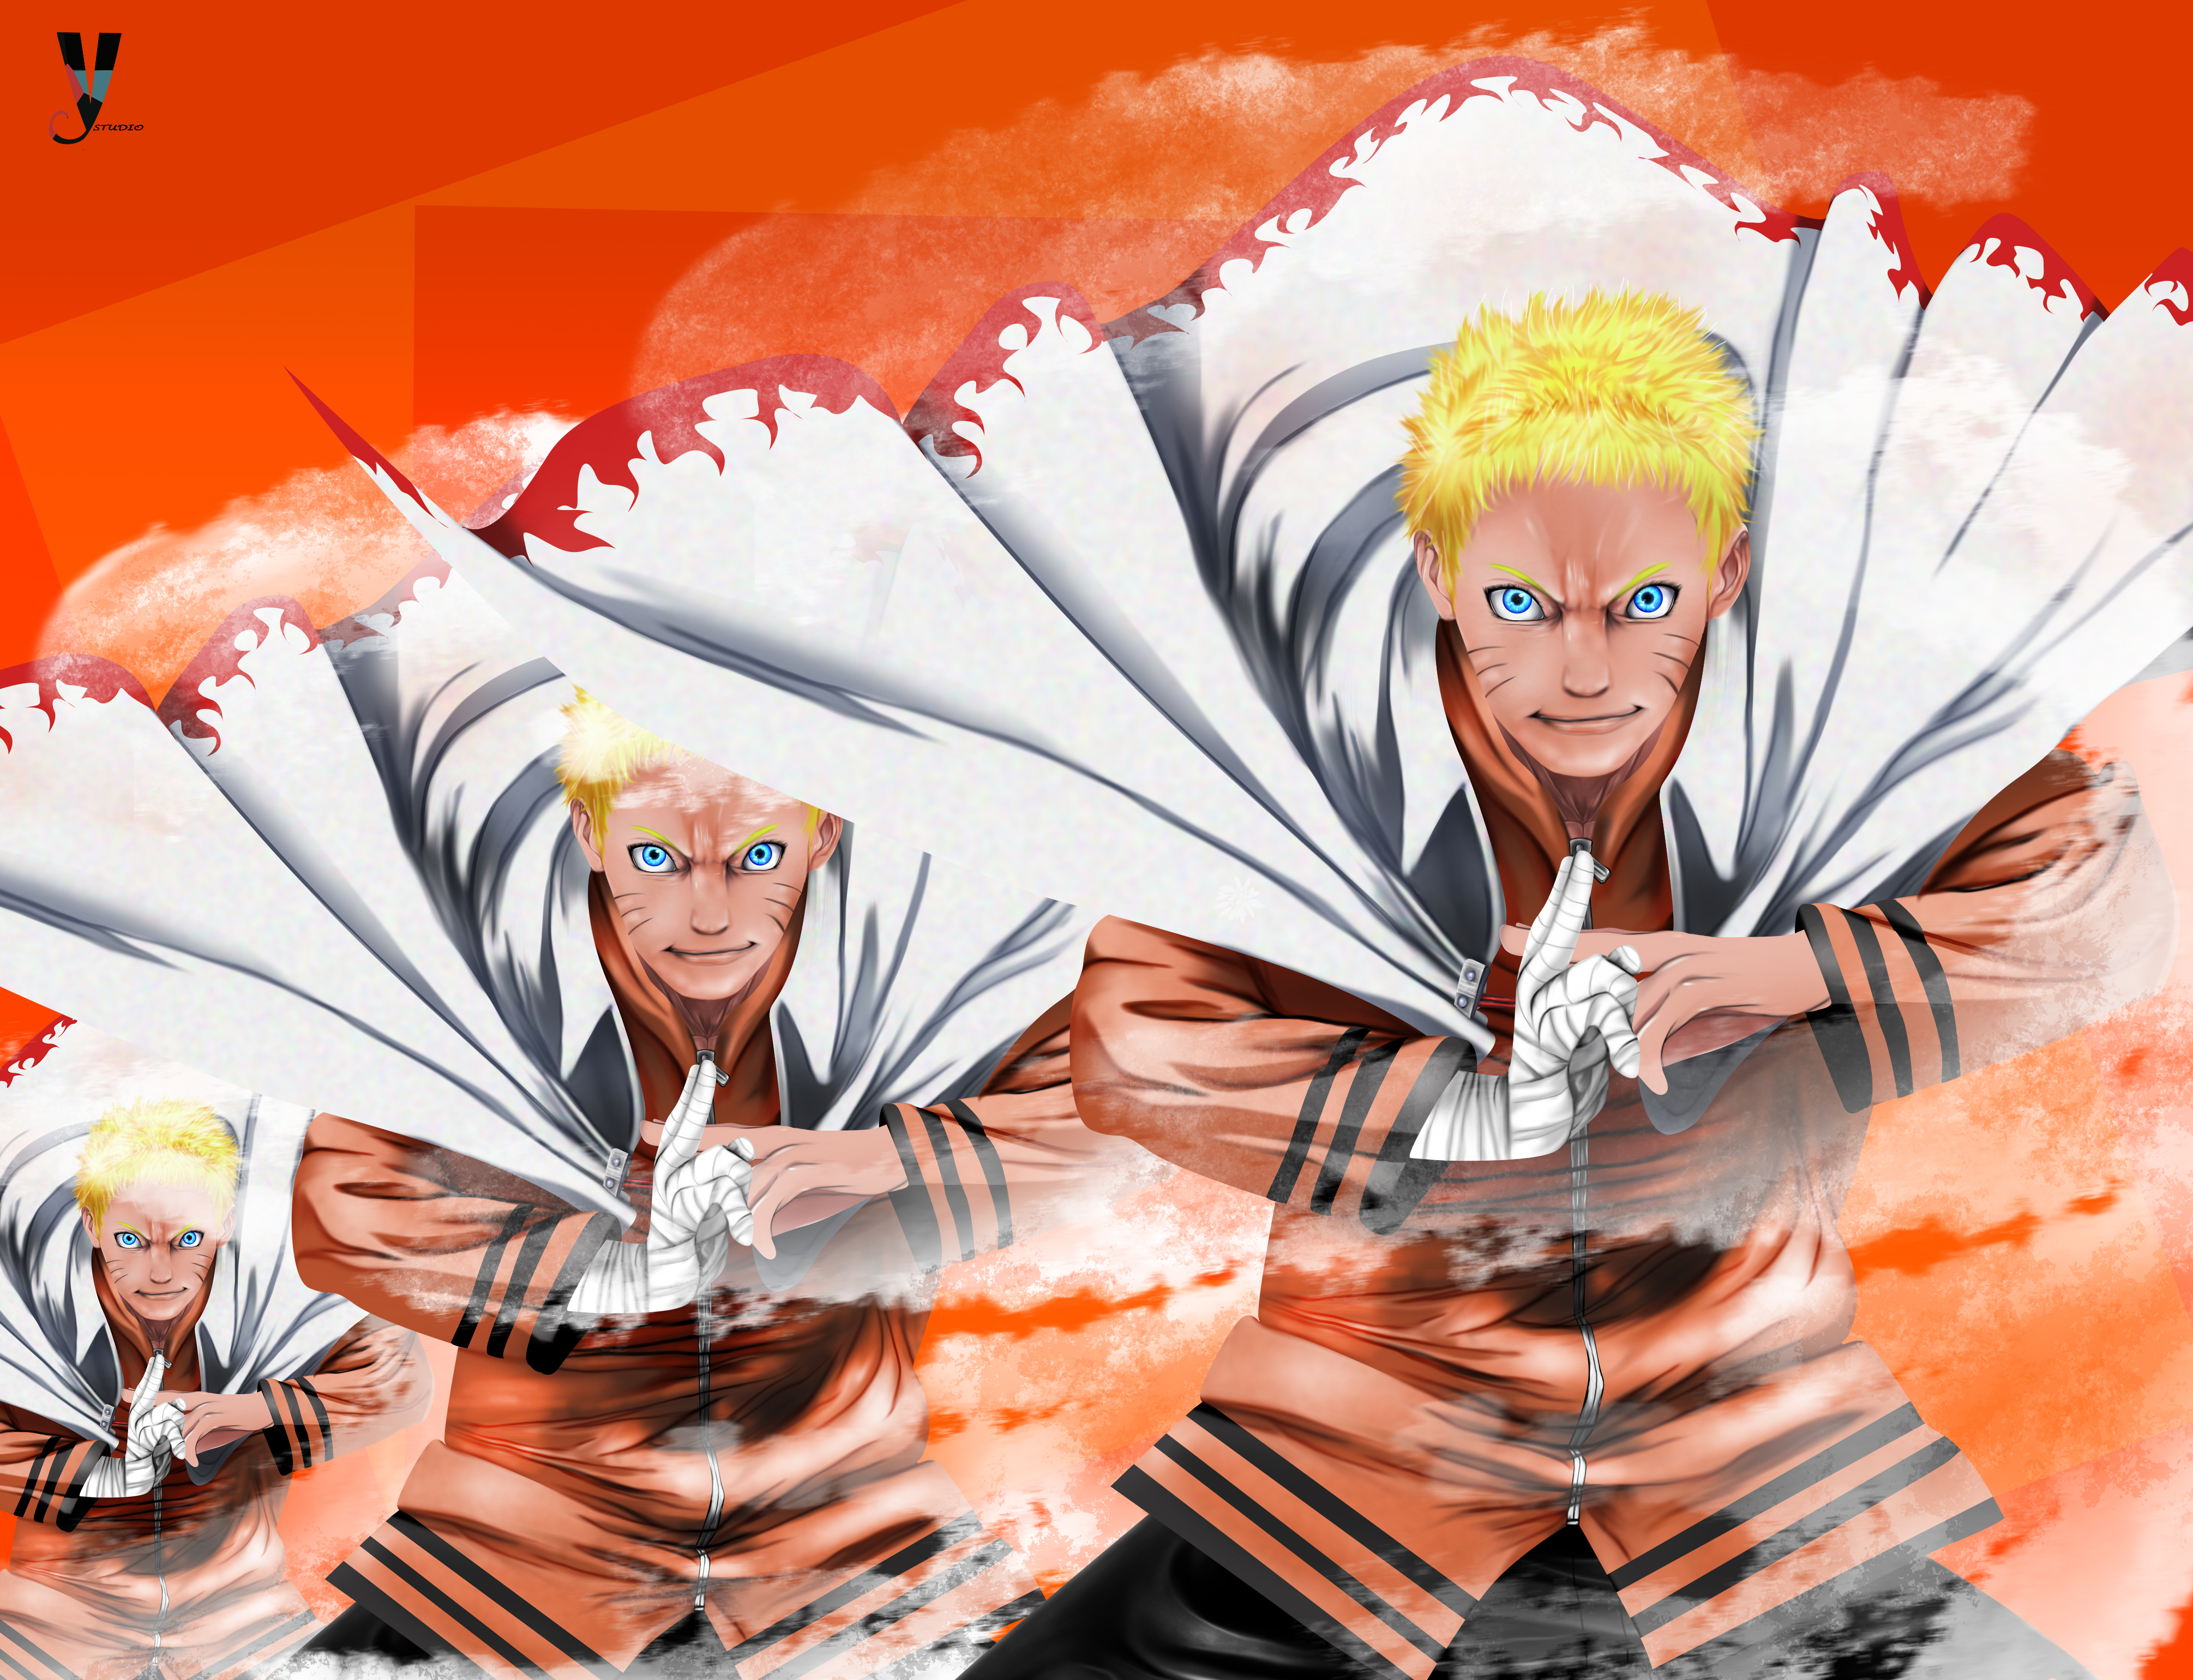 Hokage (Naruto) wallpapers for desktop, download free Hokage (Naruto)  pictures and backgrounds for PC